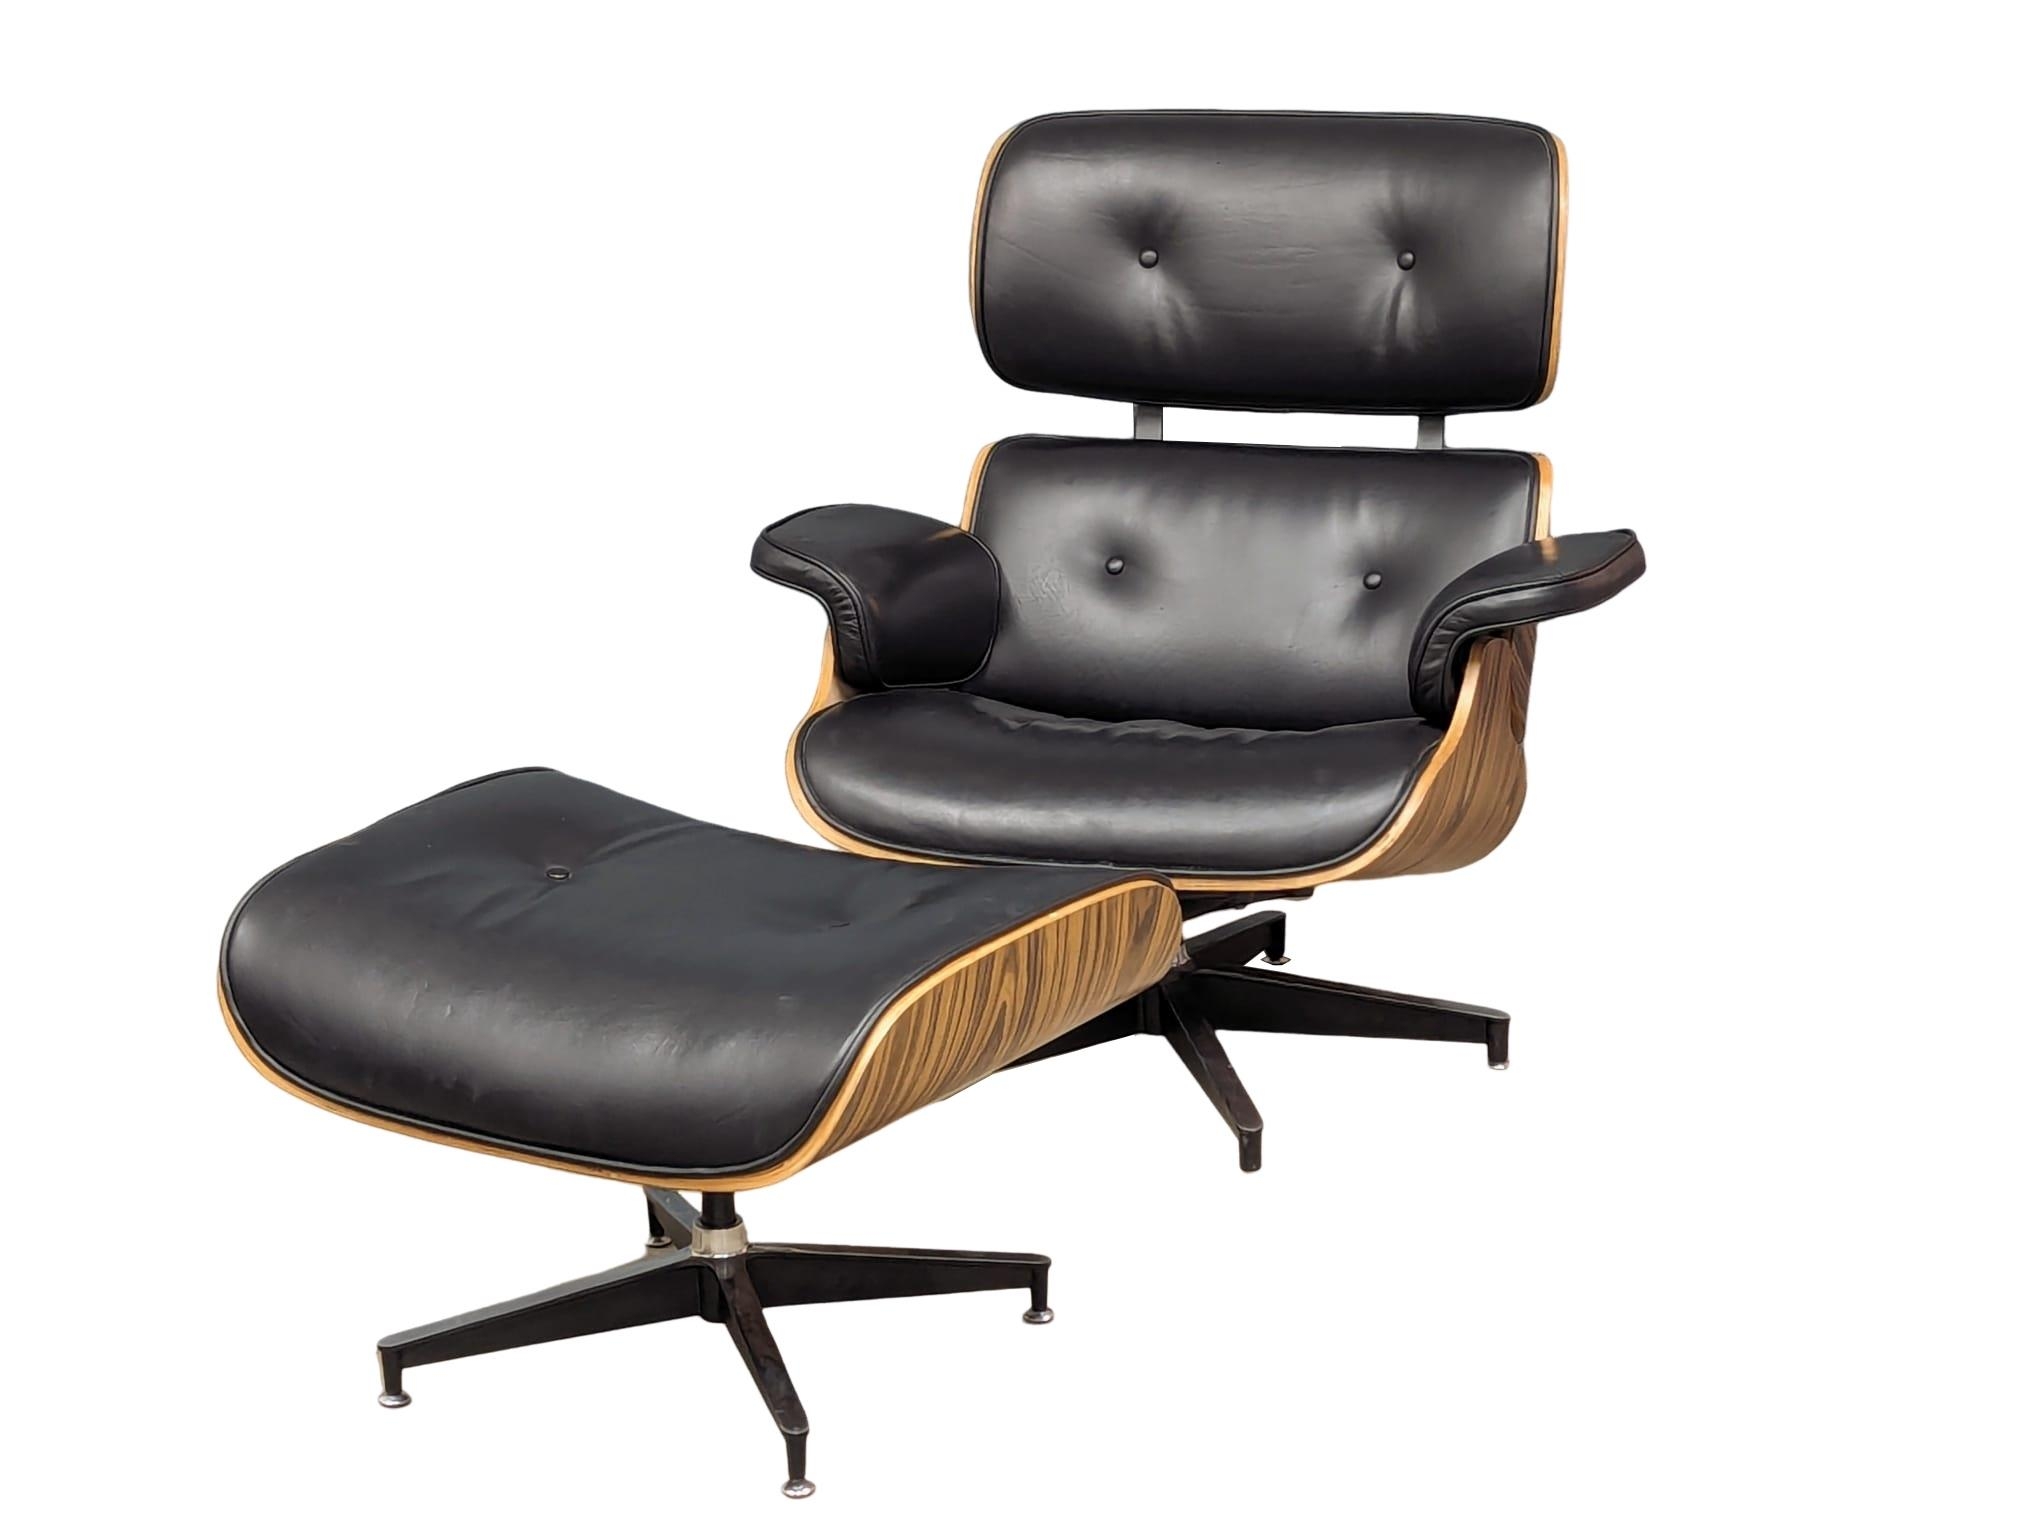 A Charles & Ray Eames Style swivel chair and ottoman.